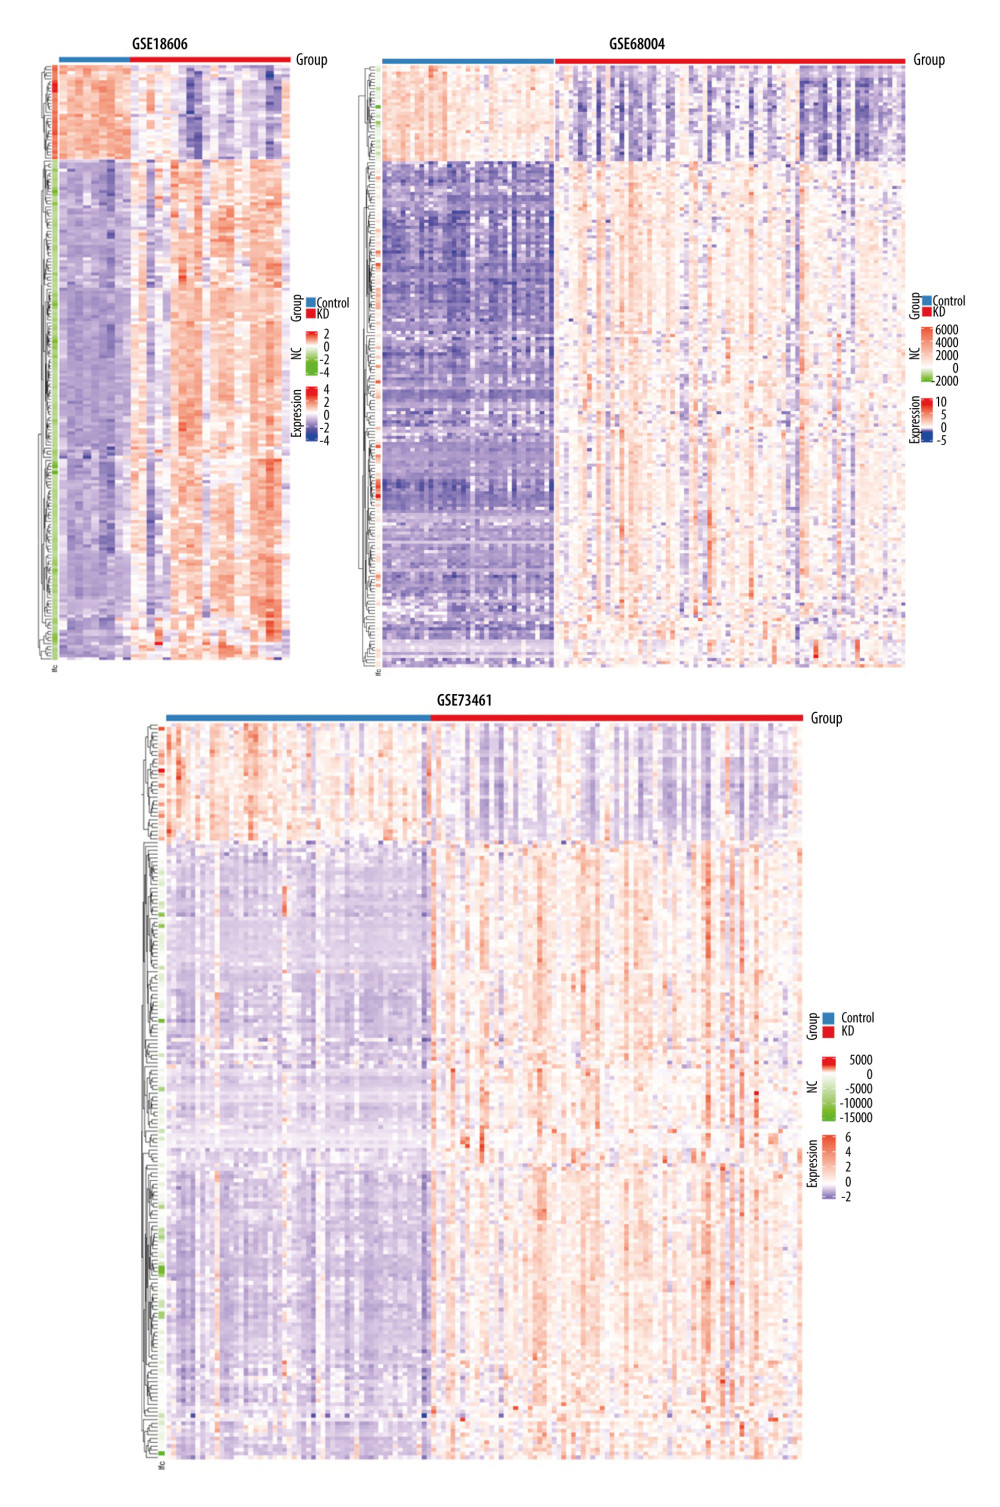 Heatmaps of the shared DEGs in the 3 datasets. The expression of the 195 shared DEGs among KD and controls in each dataset are shown via heatmap. The x-axis represents different samples, and y-axis represents different genes. The red boxes indicate upregulated genes, and blue boxes indicate downregulated genes.